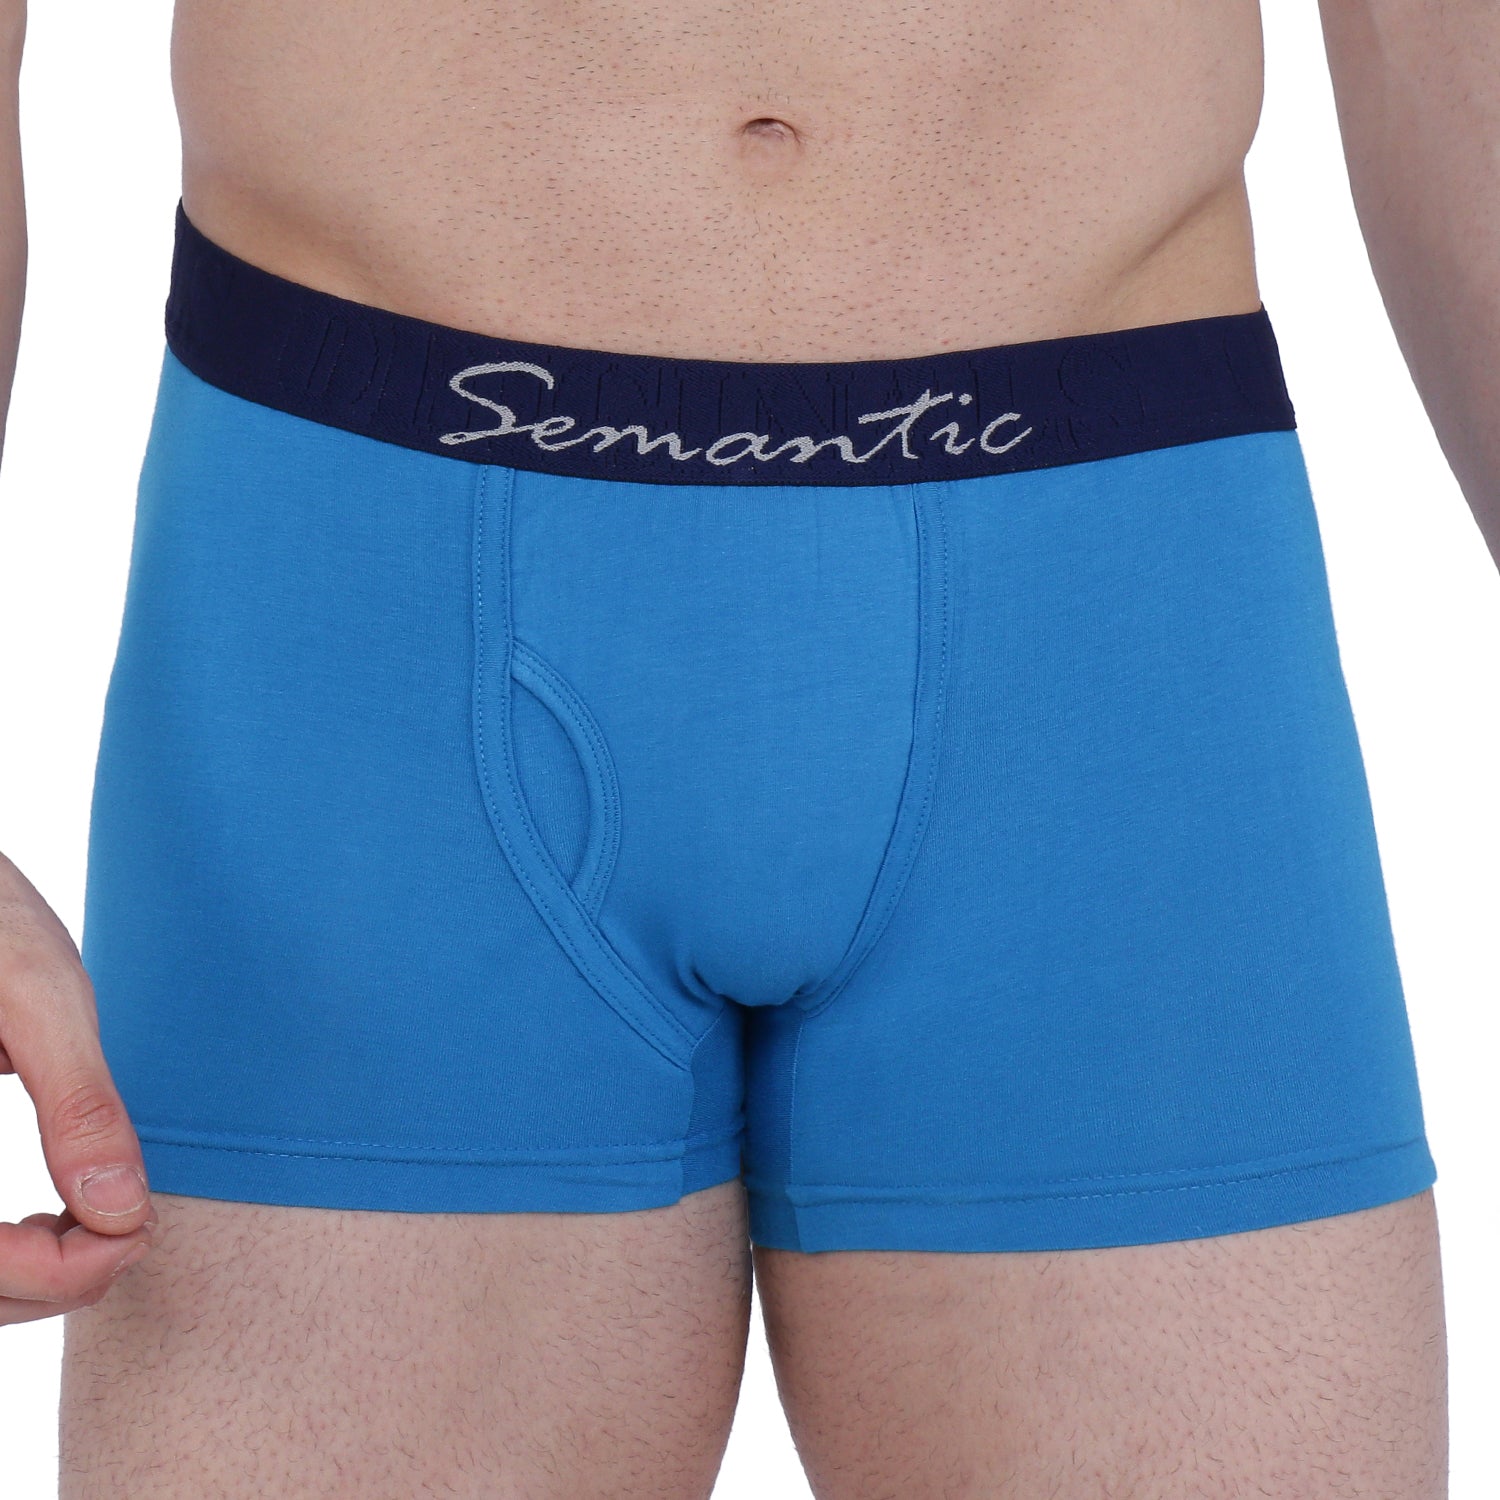 Semantic Cotton-Elastane Trunks with Fly - Solid (Available in Colors)